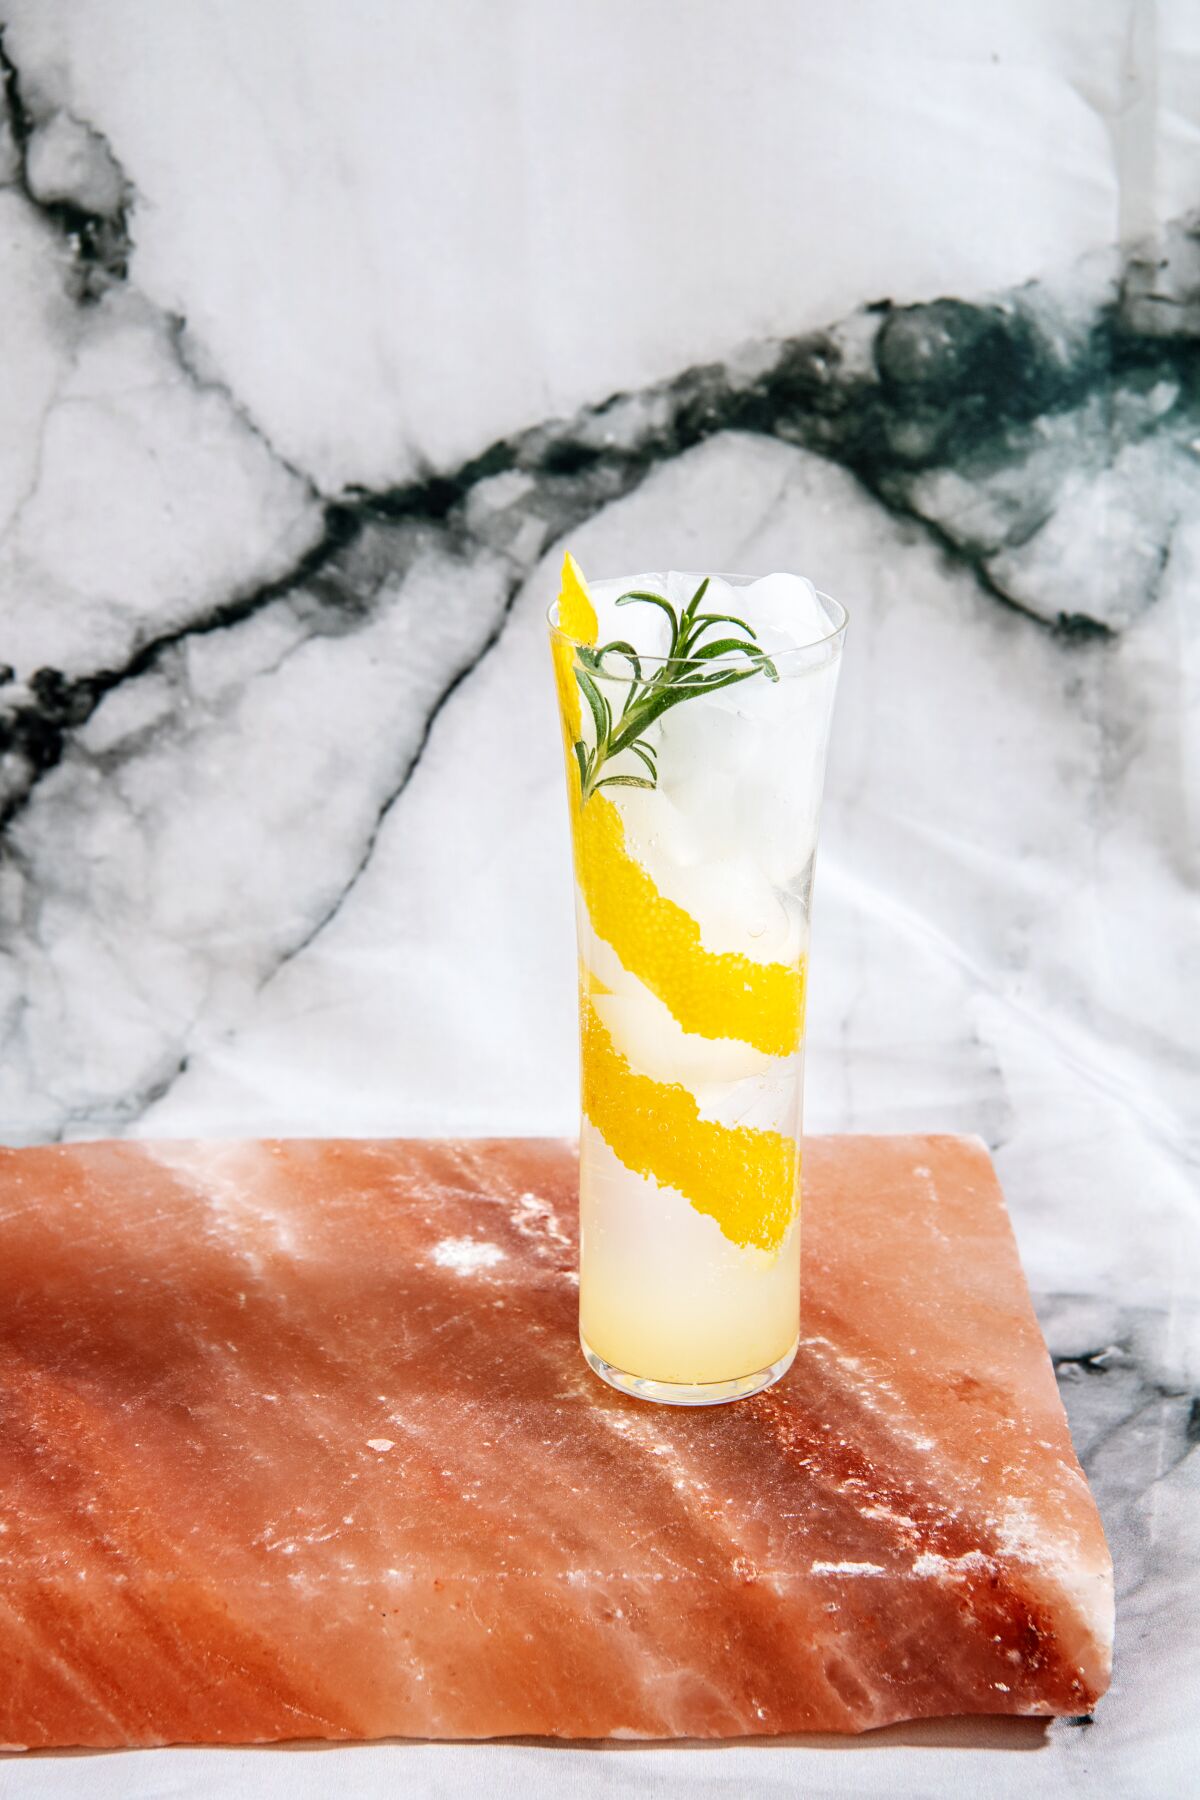 Garnish the drink with a rosemary sprig for extra freshness.